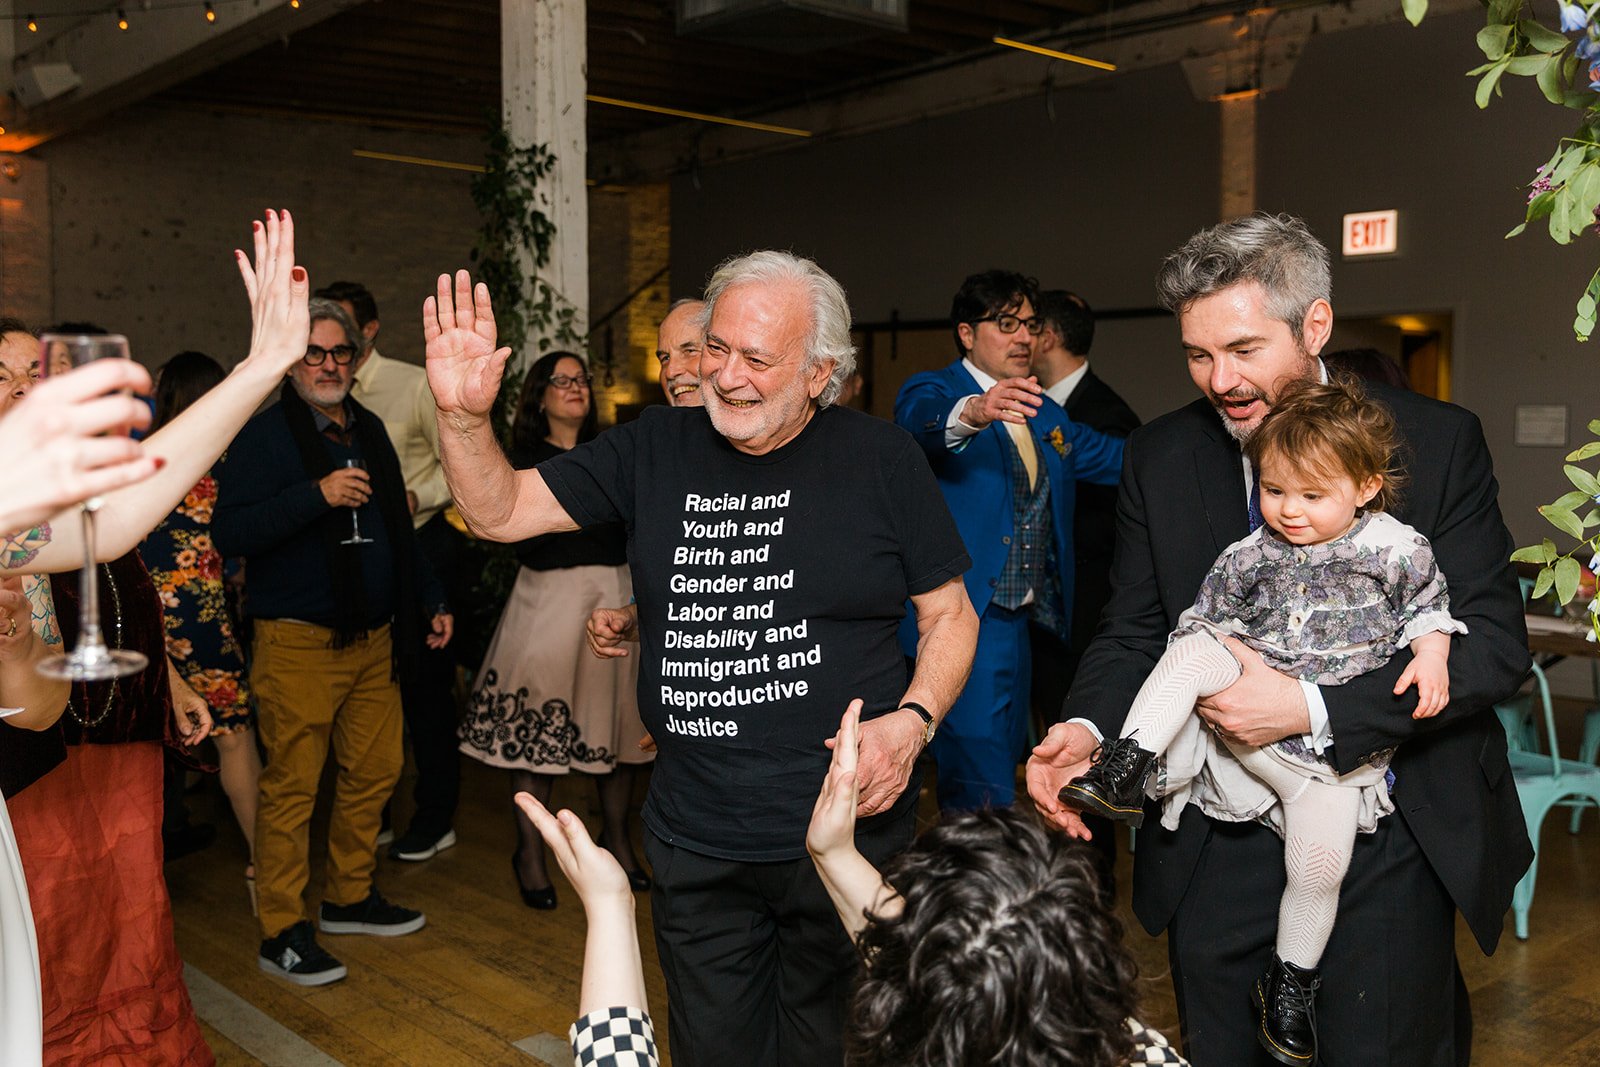  Documentary candid photo of guests dancing at nontraditional Jewish and Venezuelan wedding reception at The Joinery Chicago an Industrial loft wedding venue In Logan Square.  